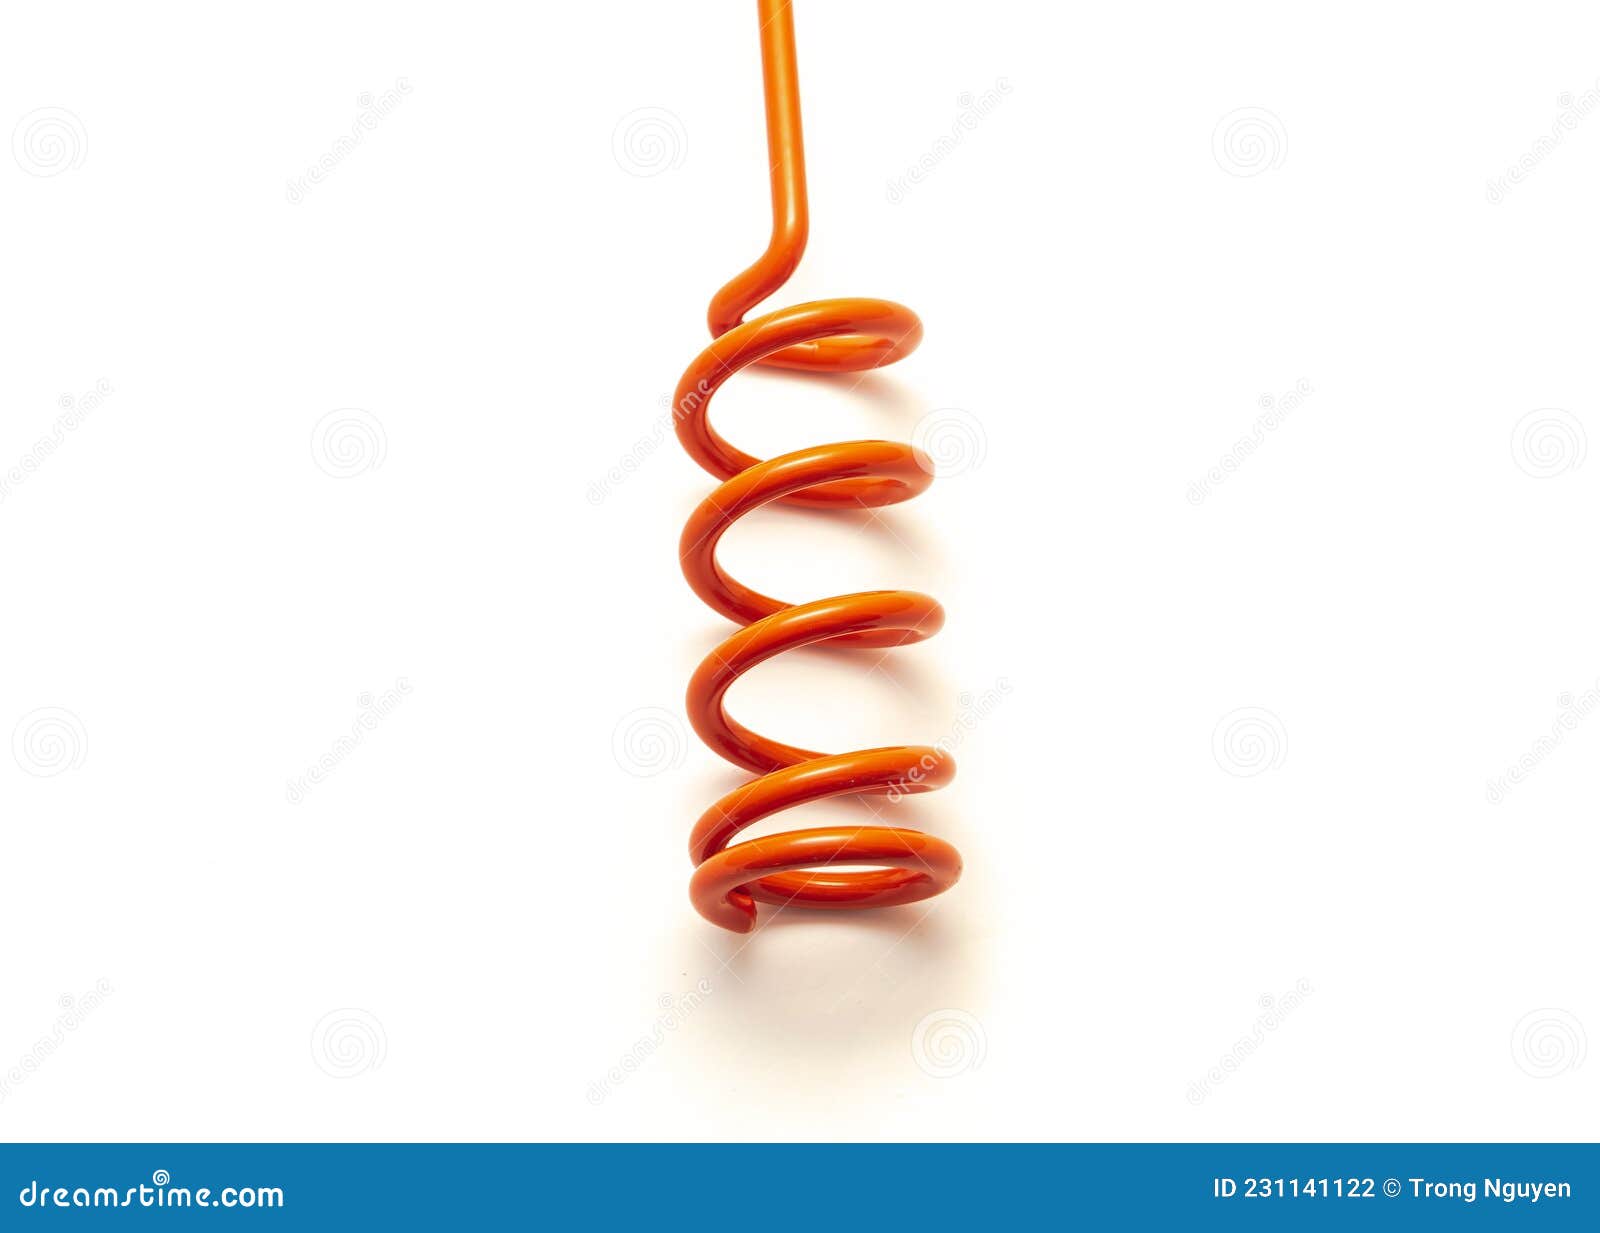 https://thumbs.dreamstime.com/z/zoom-part-red-powdered-coated-steel-finish-spiral-rod-pole-holder-bank-fishing-gear-isolated-white-close-up-view-powder-231141122.jpg